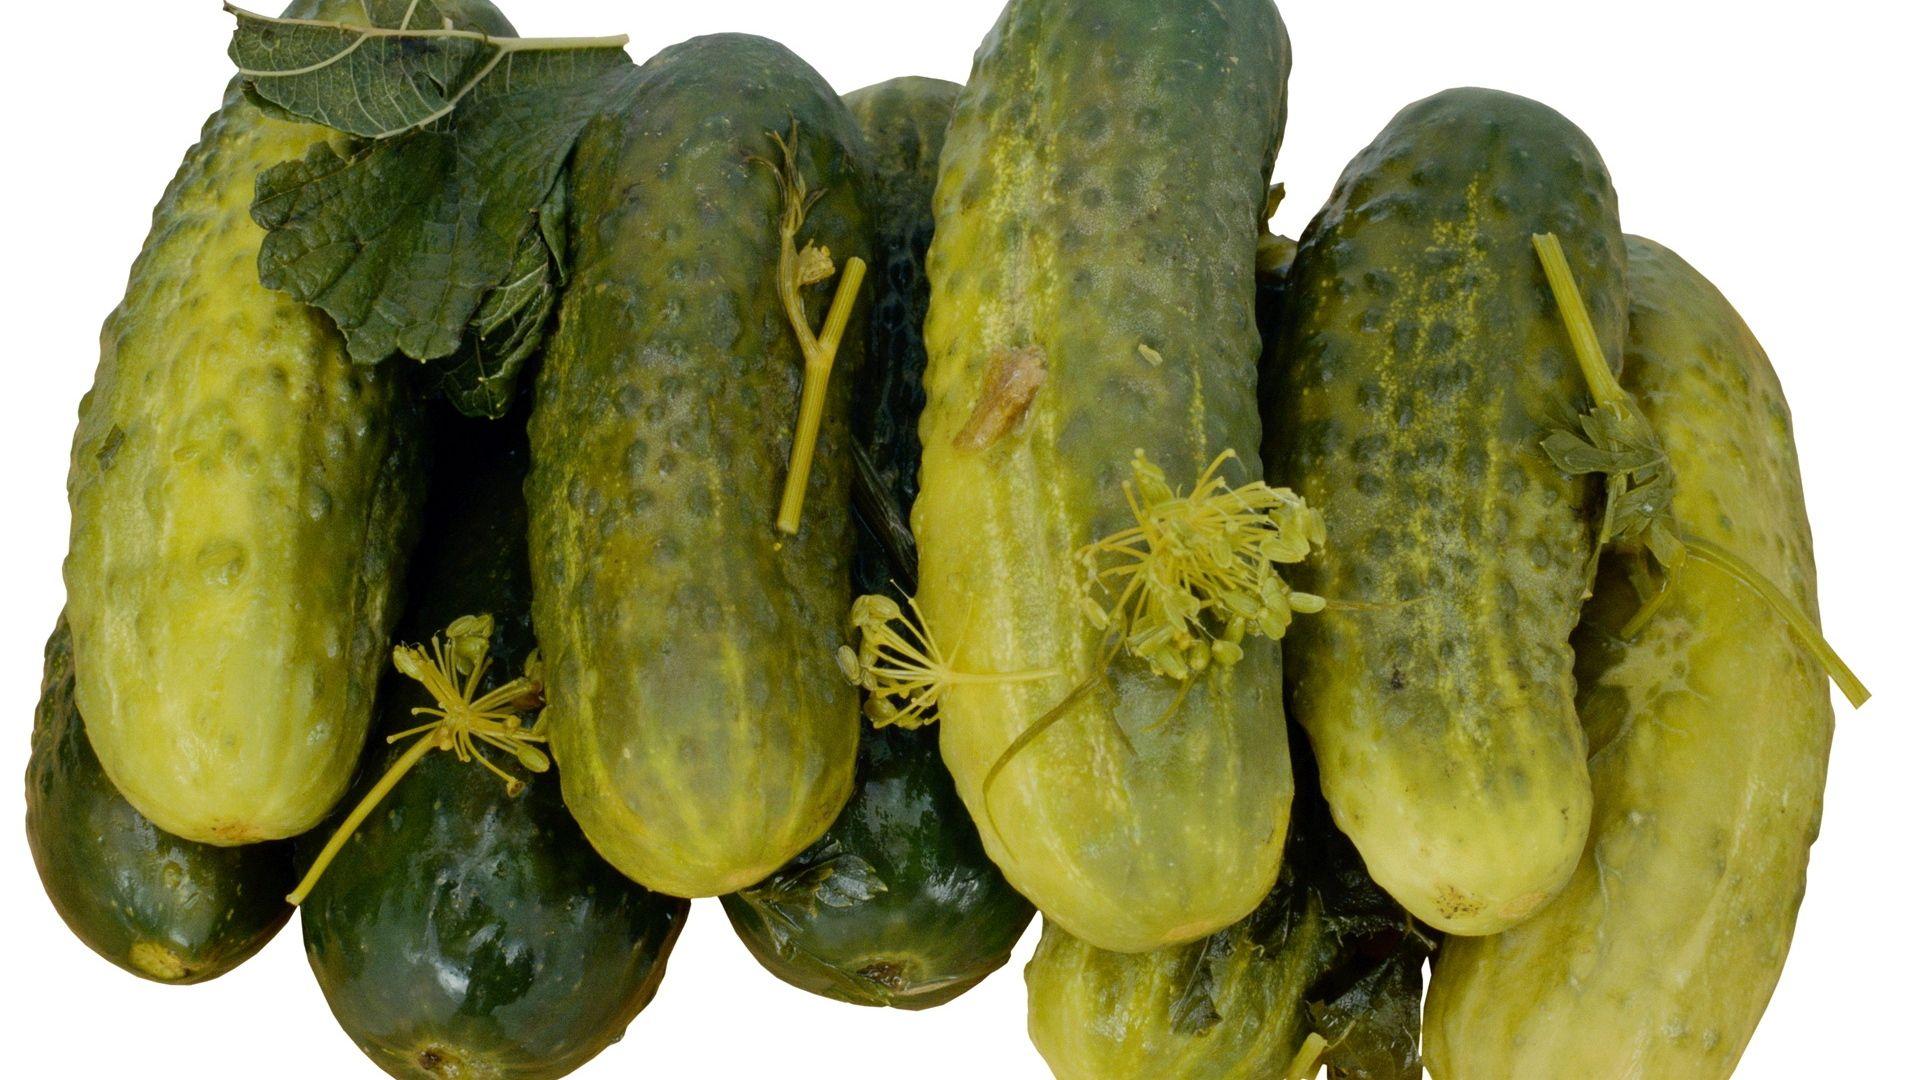 Download wallpaper 1920x1080 cucumbers, pickles, salted, pickled